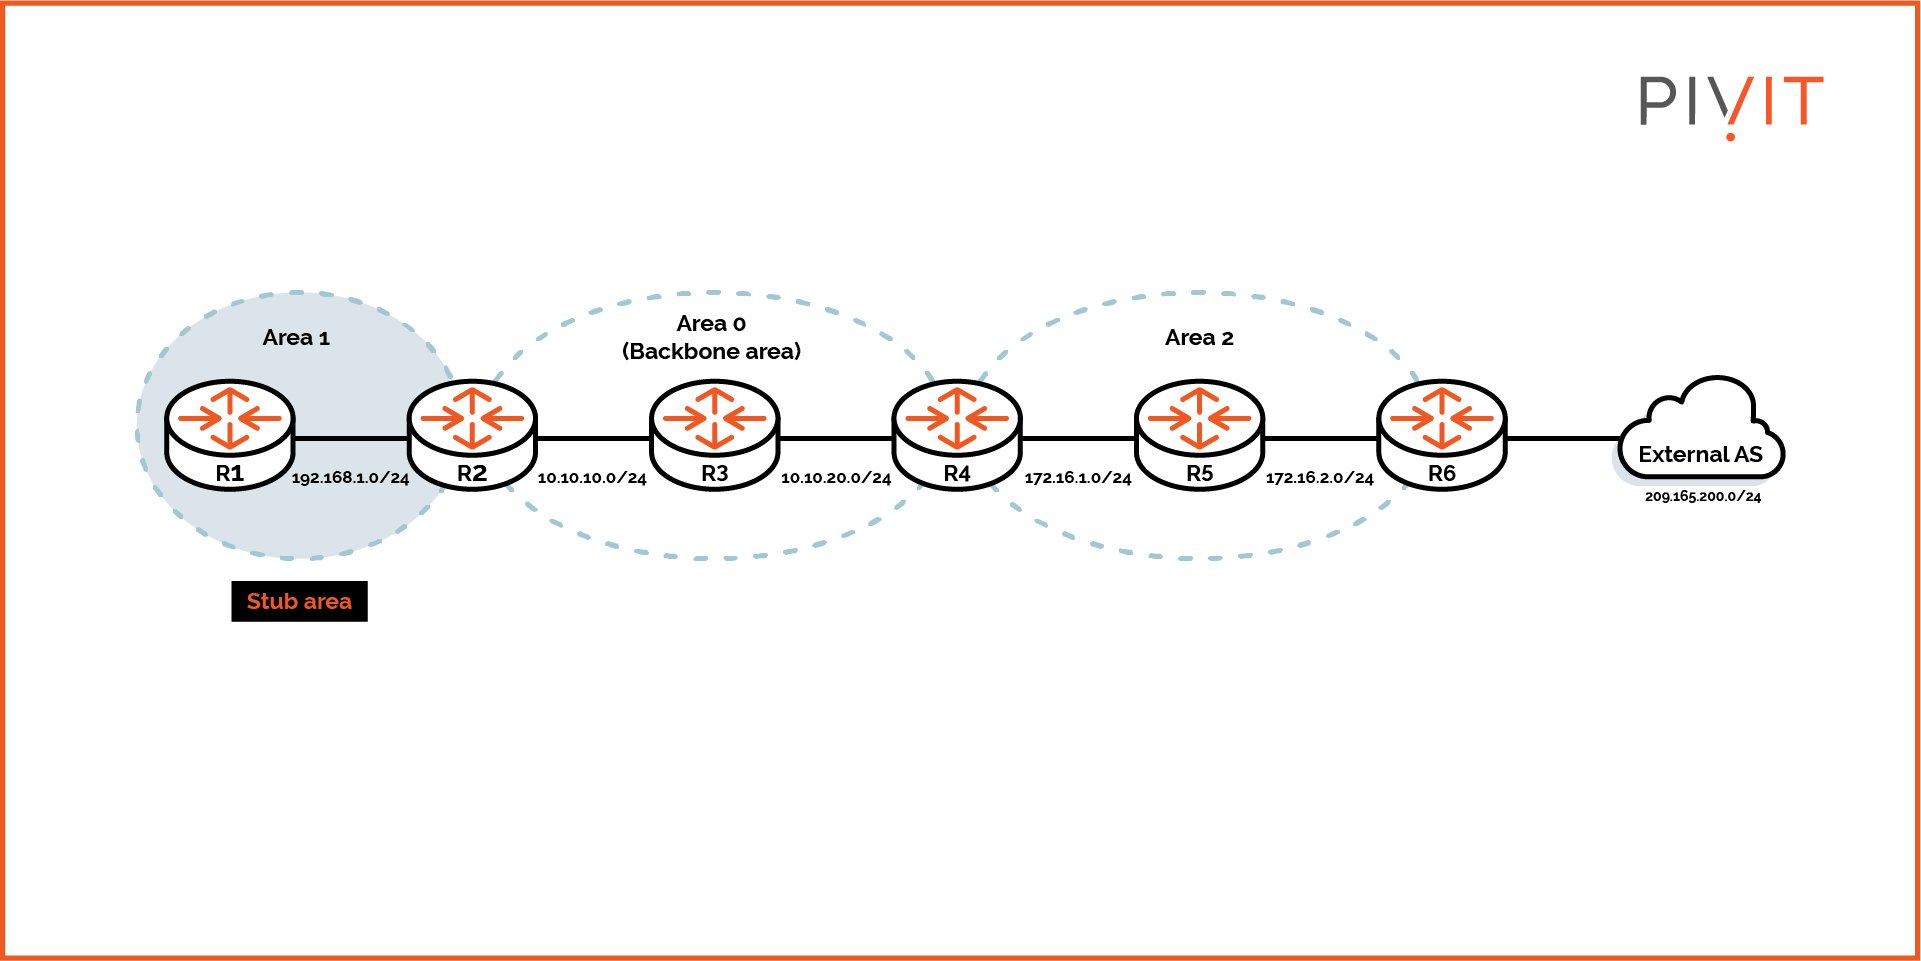 IP addressing of the networks within the OSPF domain with connection to only one external AS